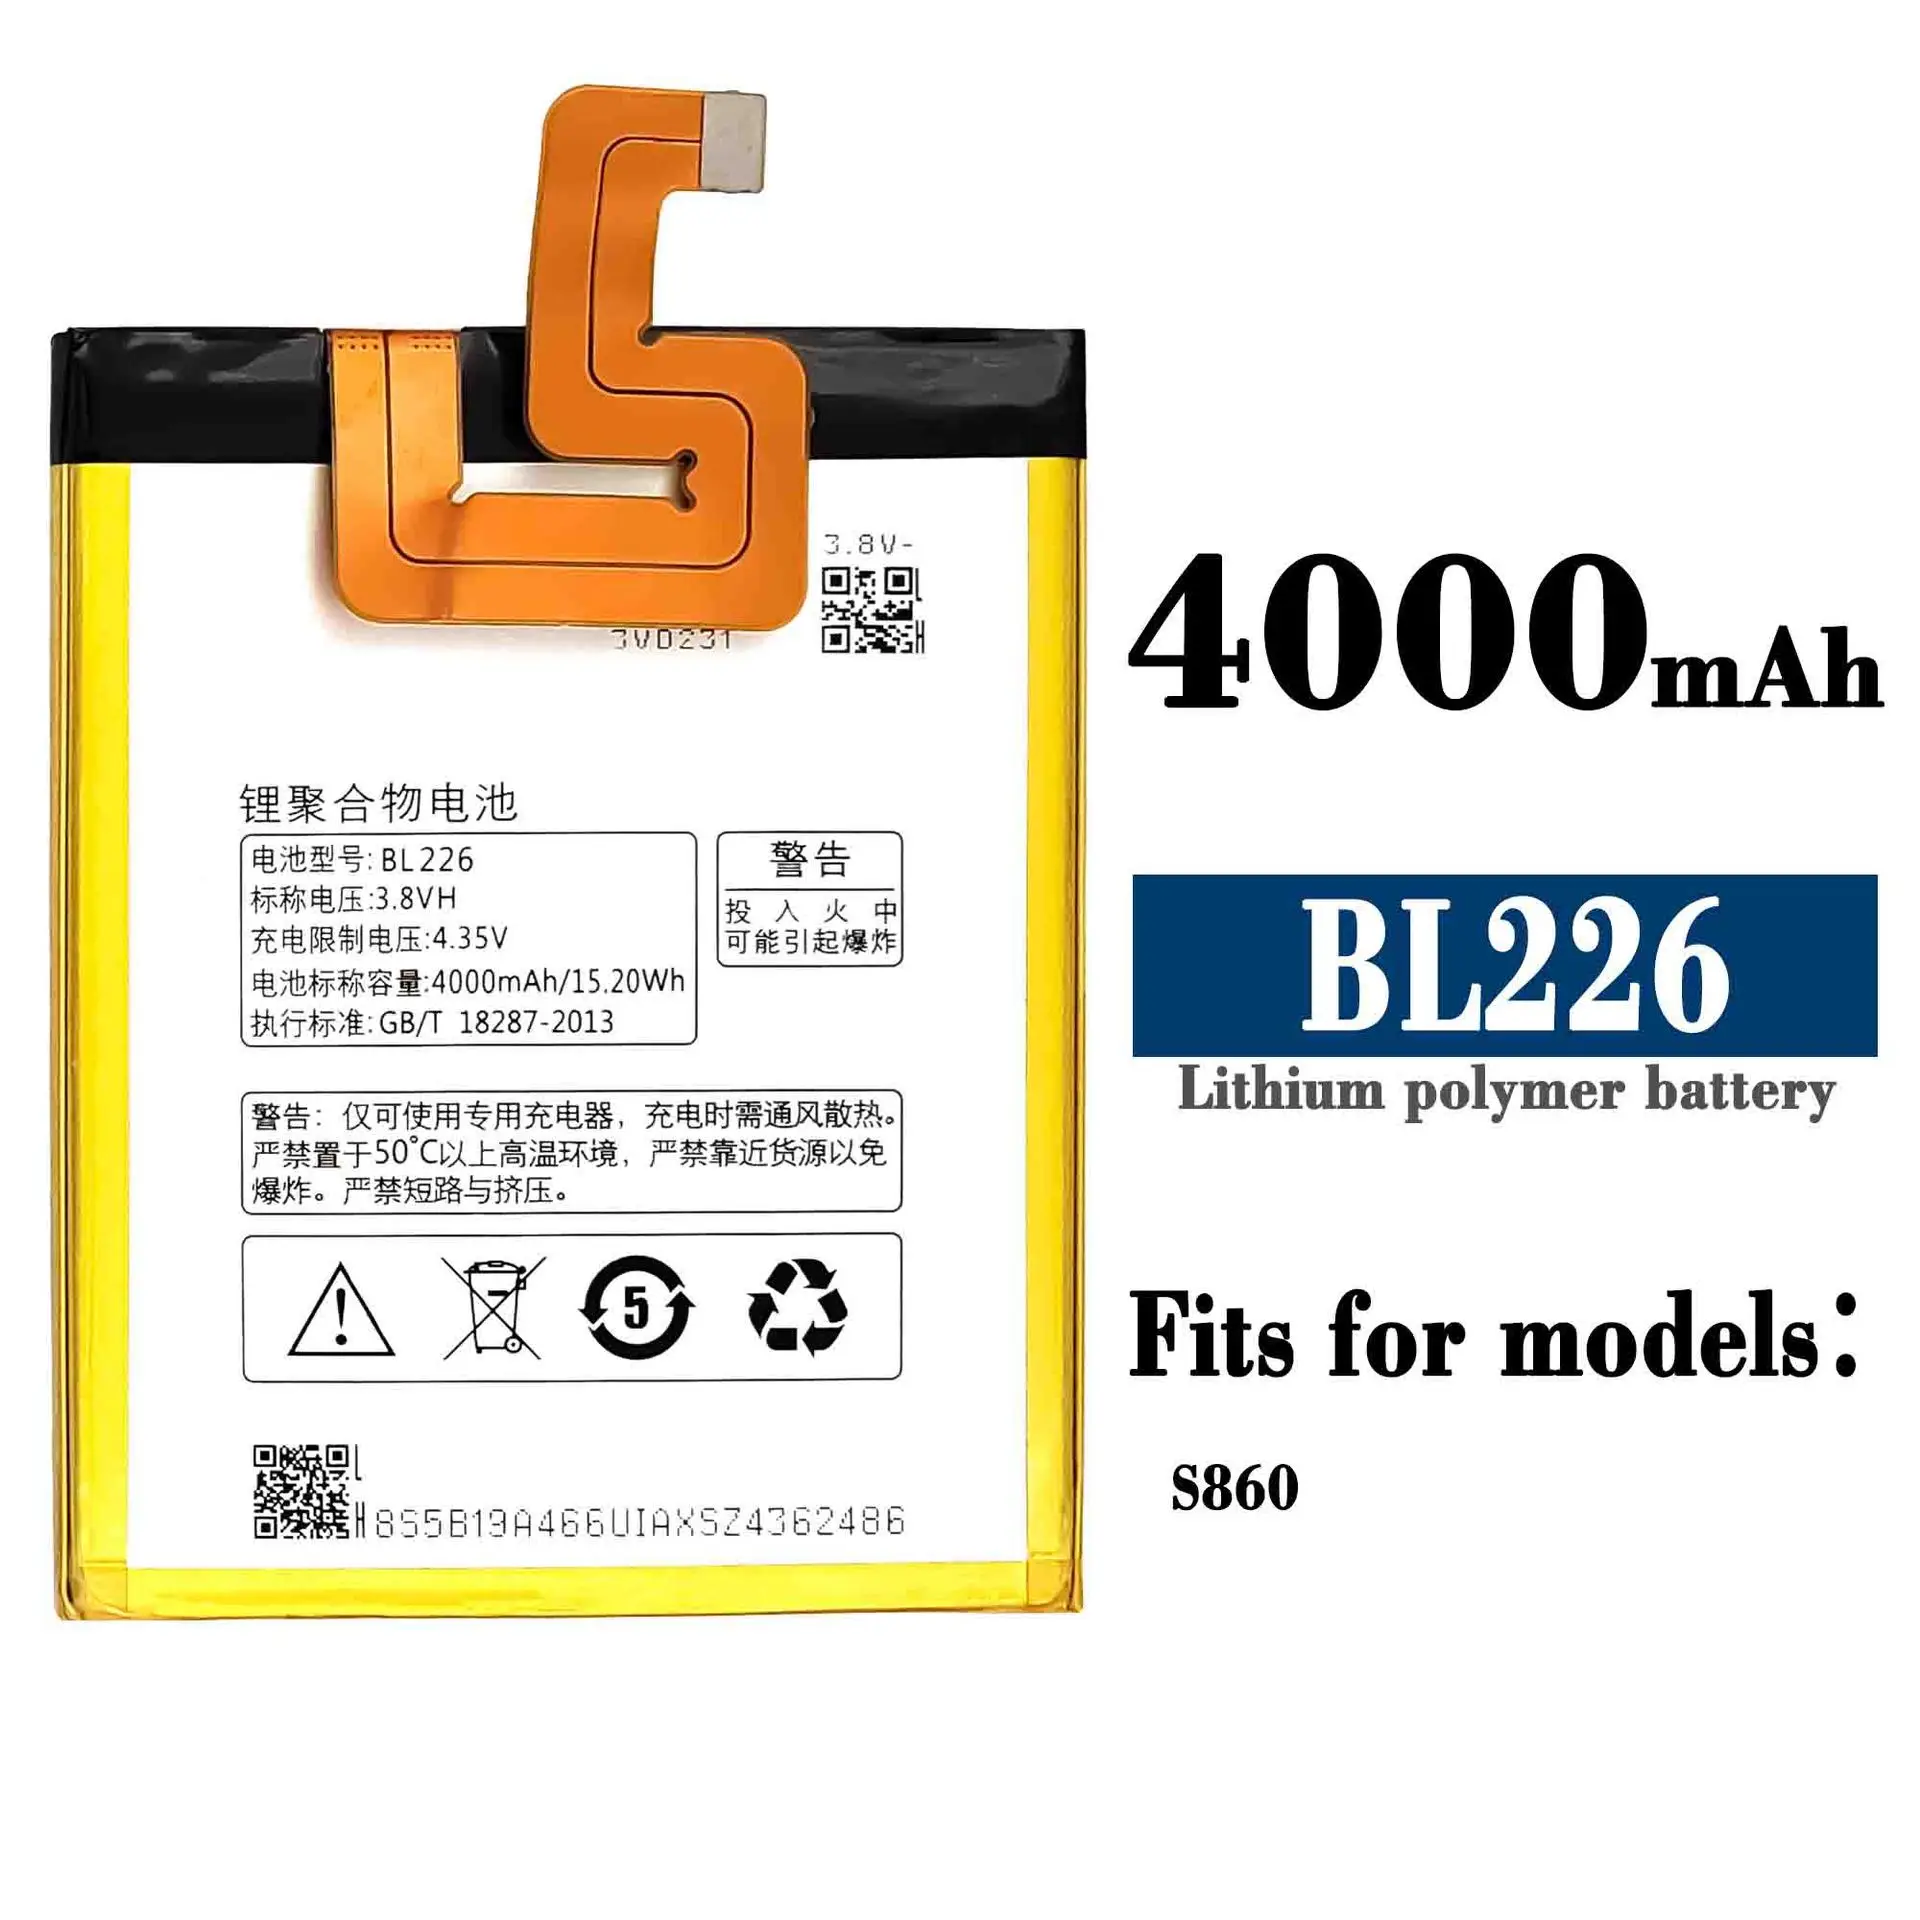 

100% High Quality Replacement Battery For Lenovo S860 BL226 4000mAh Mobile Phone Large Capacity New Batteries